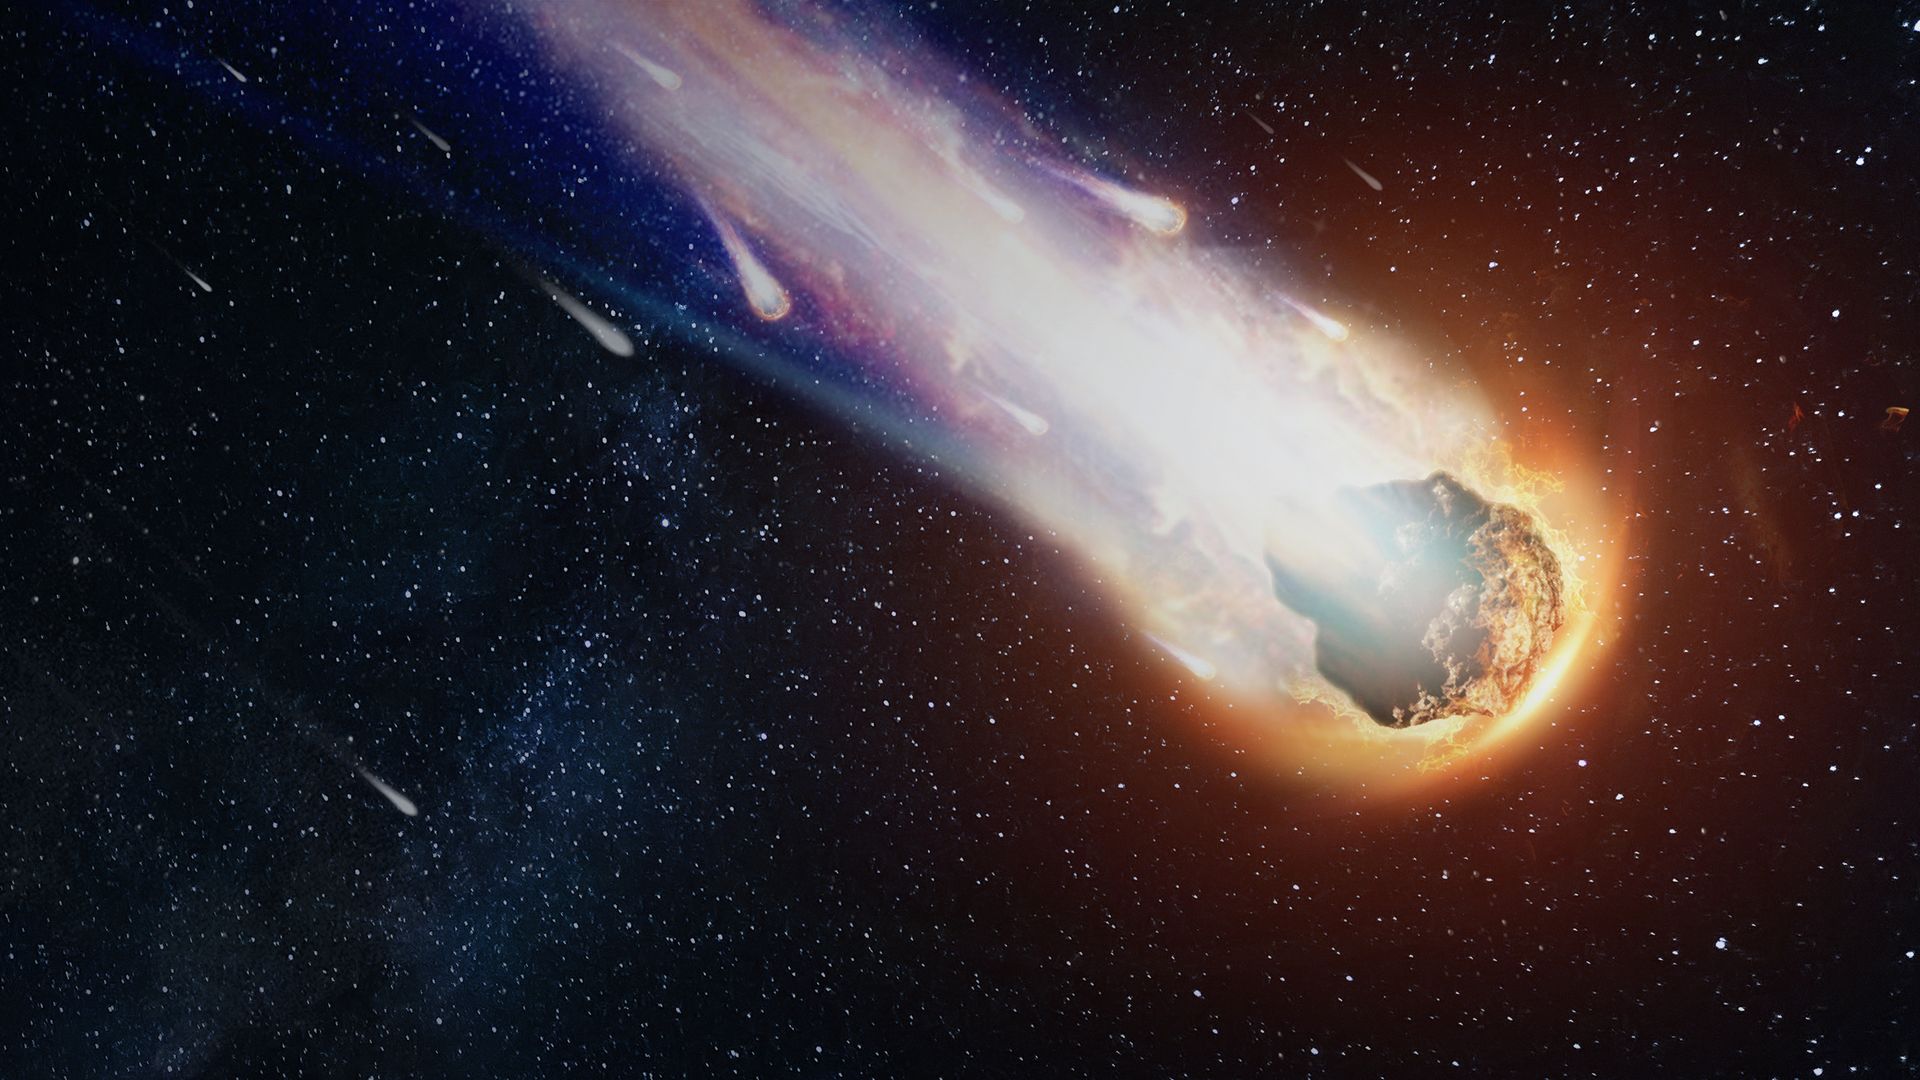 Brace for Impact: International Asteroid Day